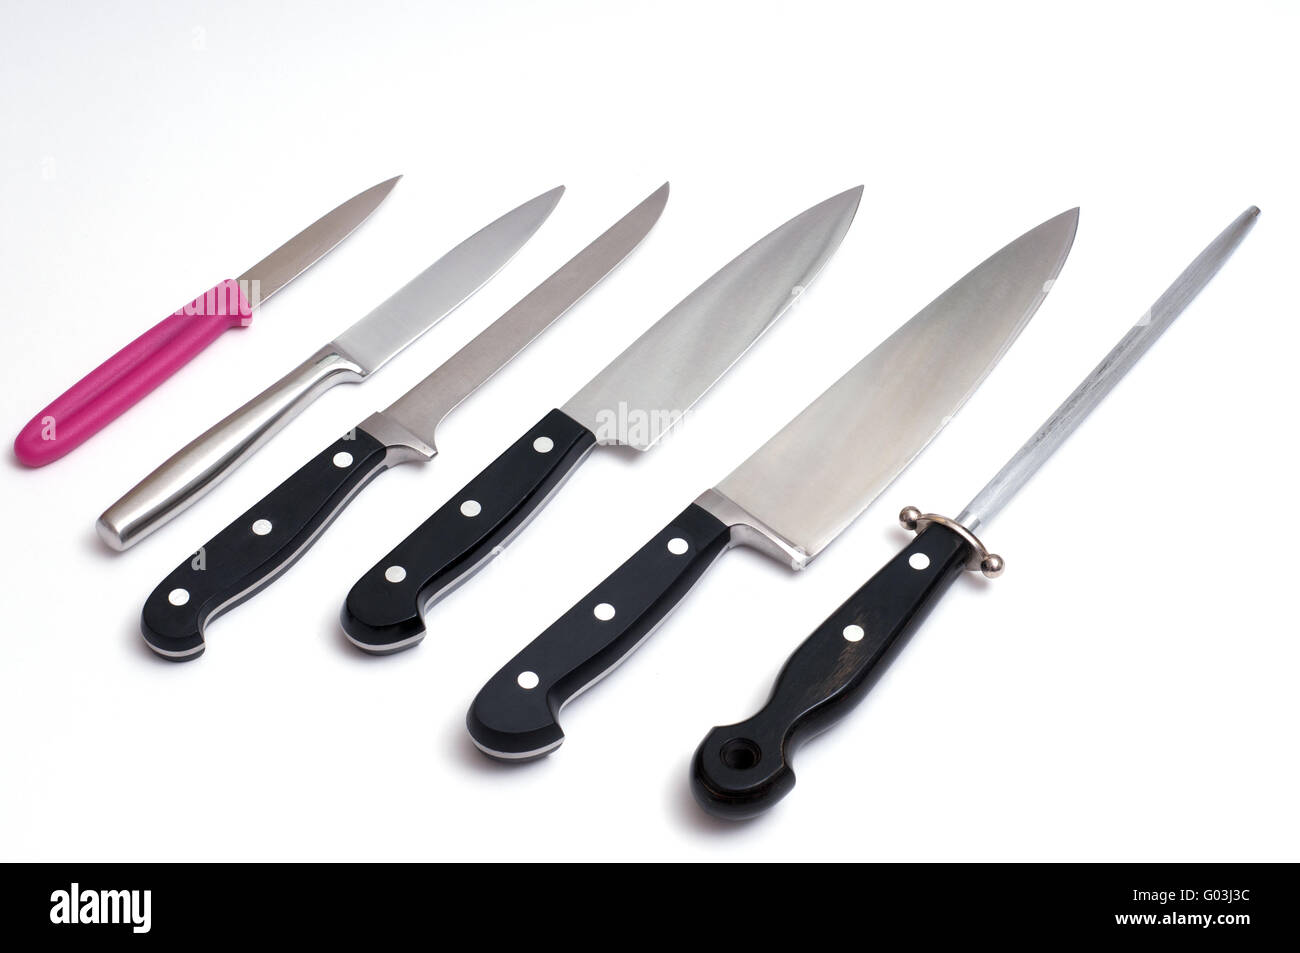 Different cooking knifes with sharpening steel Stock Photo